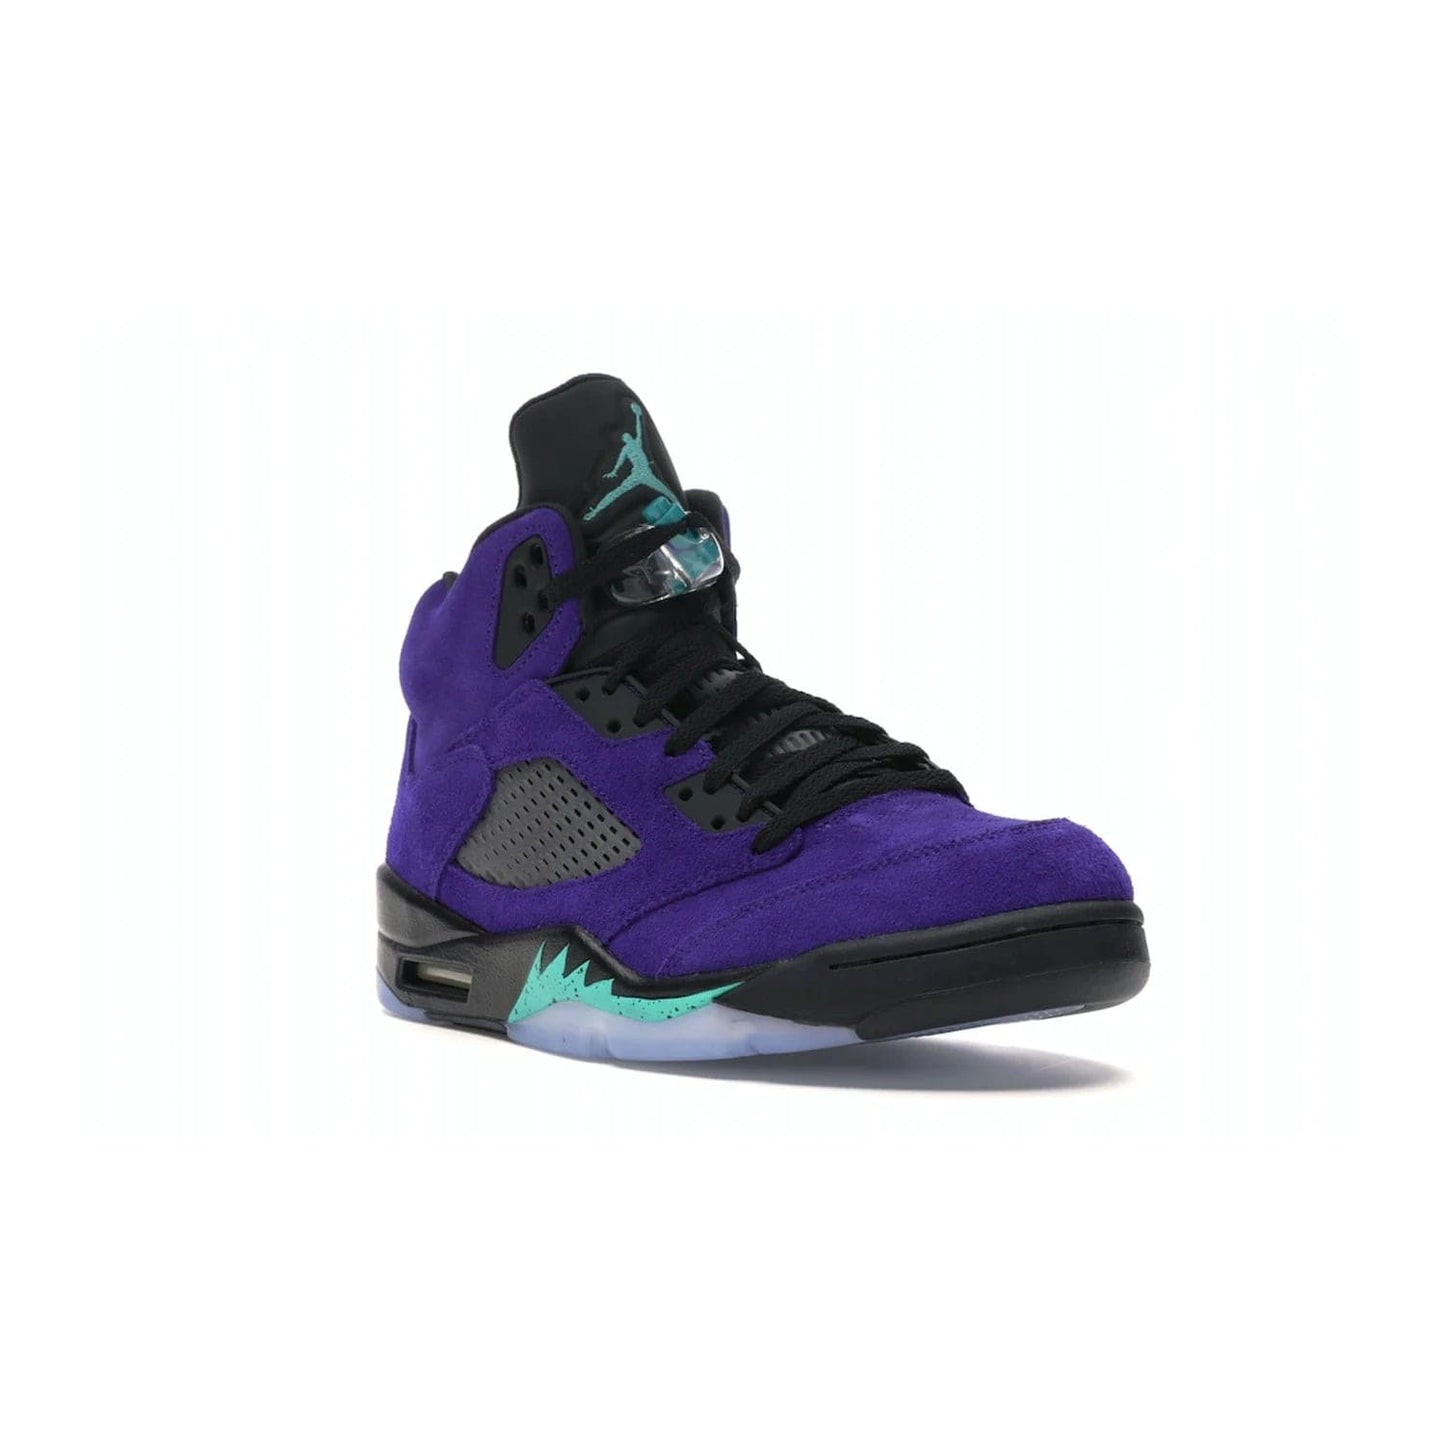 Jordan 5 Retro Alternate Grape - Image 6 - Only at www.BallersClubKickz.com - Bring the classic Jordan 5 Retro Alternate Grape to your sneaker collection! Featuring a purple suede upper, charcoal underlays, green detailing, and an icy and green outsole. Releasing for the first time since 1990, don't miss this chance to add a piece of sneaker history to your collection.